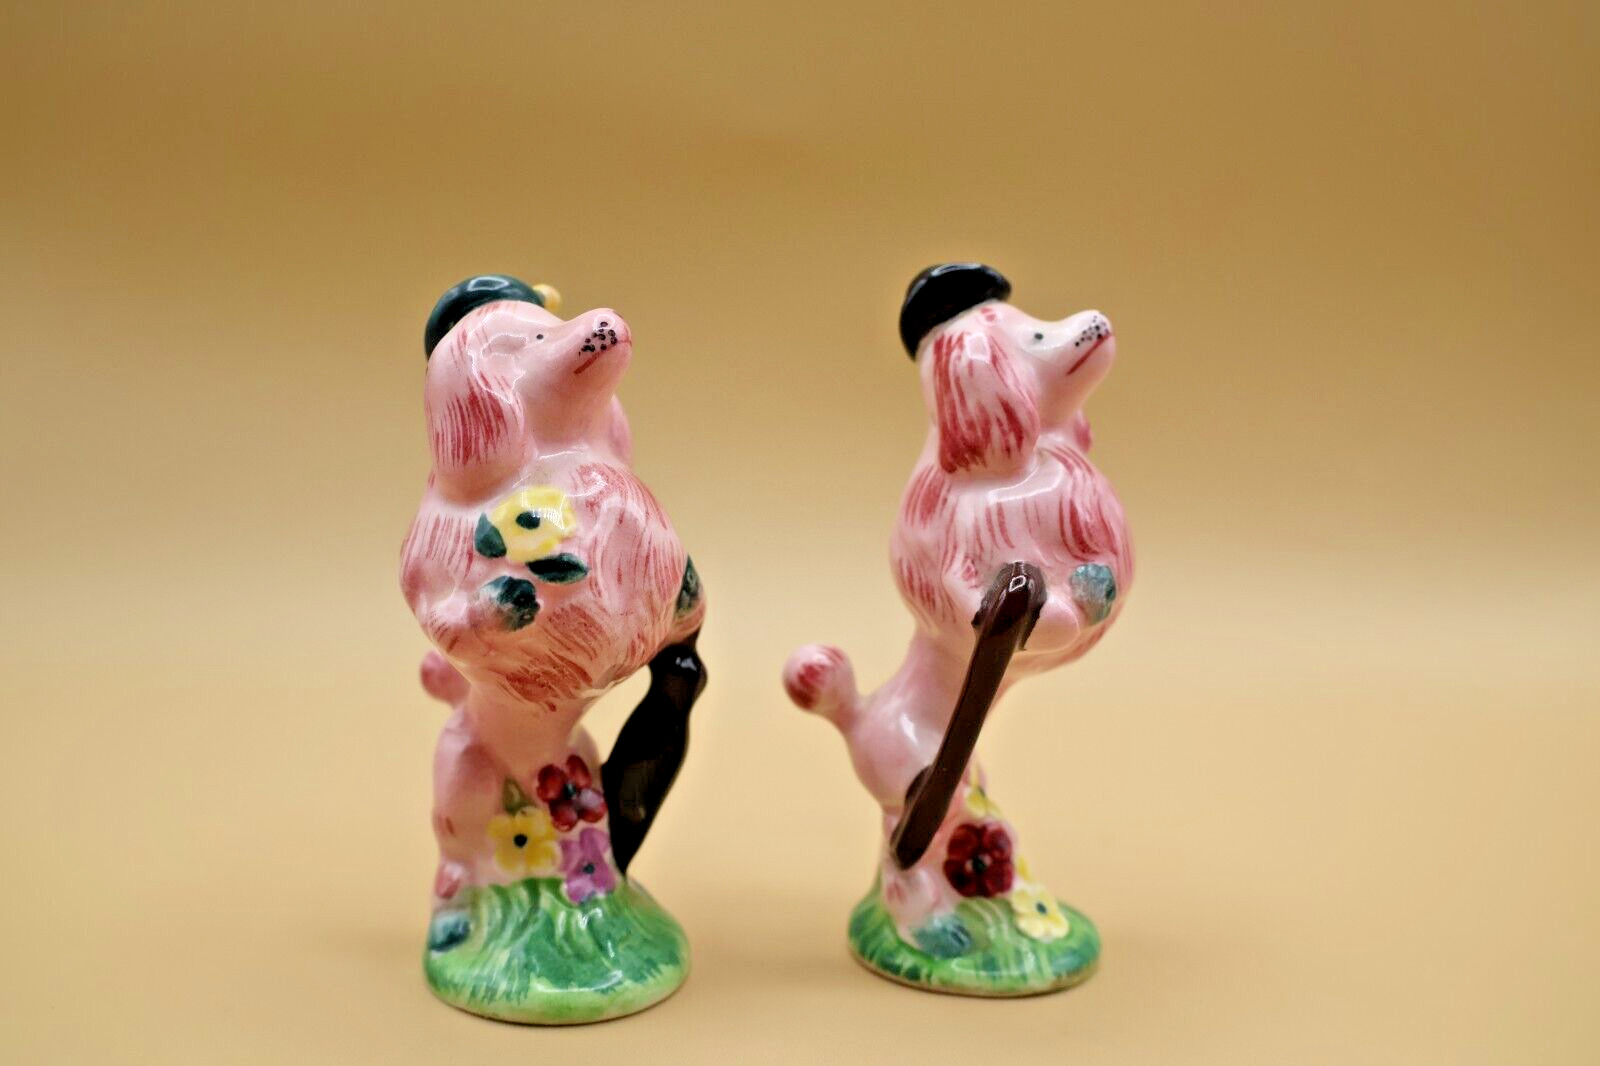 1940s Vintage Pink Poodle Salt And Pepper Shakers -Uppity Dogs Made in Japan